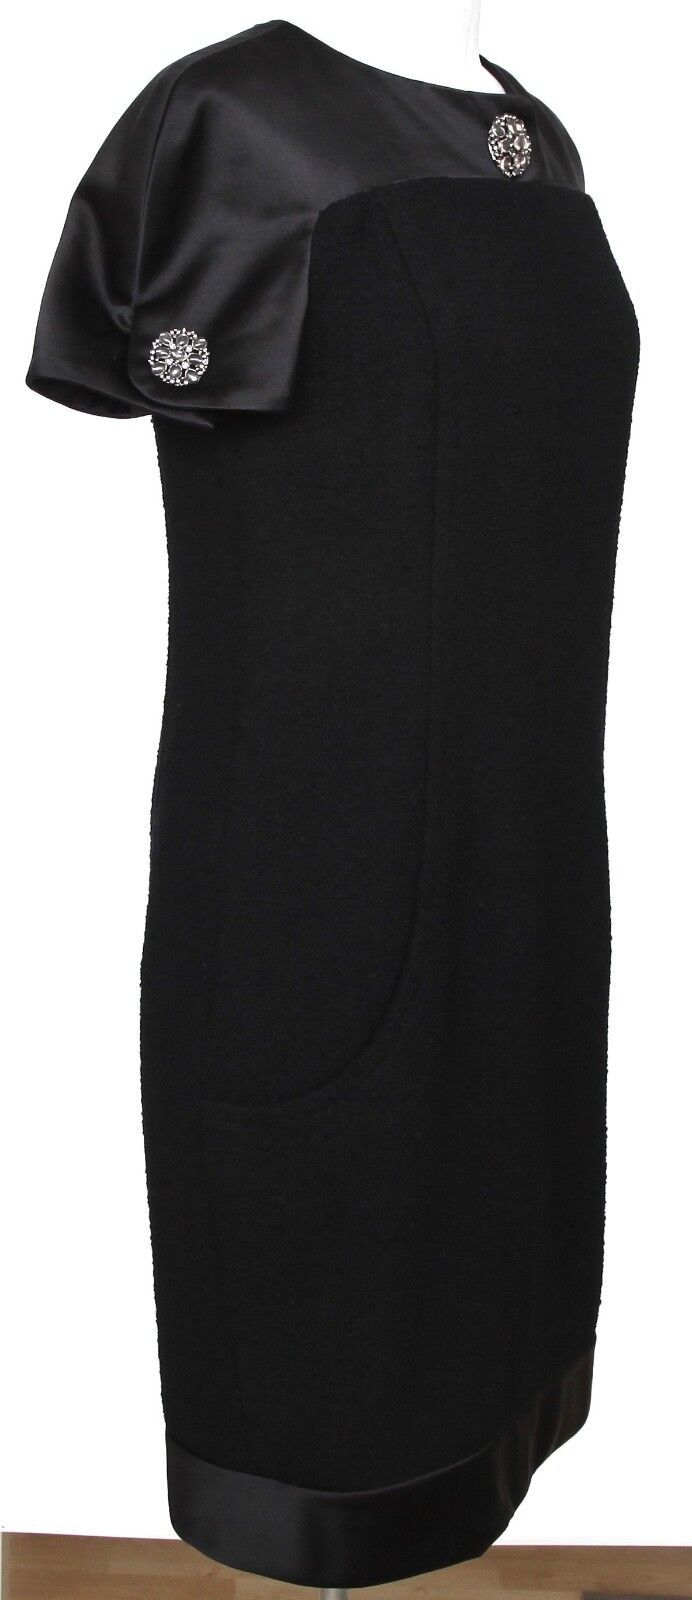 Primary image for CHANEL Black Dress Satin Shift Cap Sleeve Gripoix Sz 38 Pre-Fall 2015